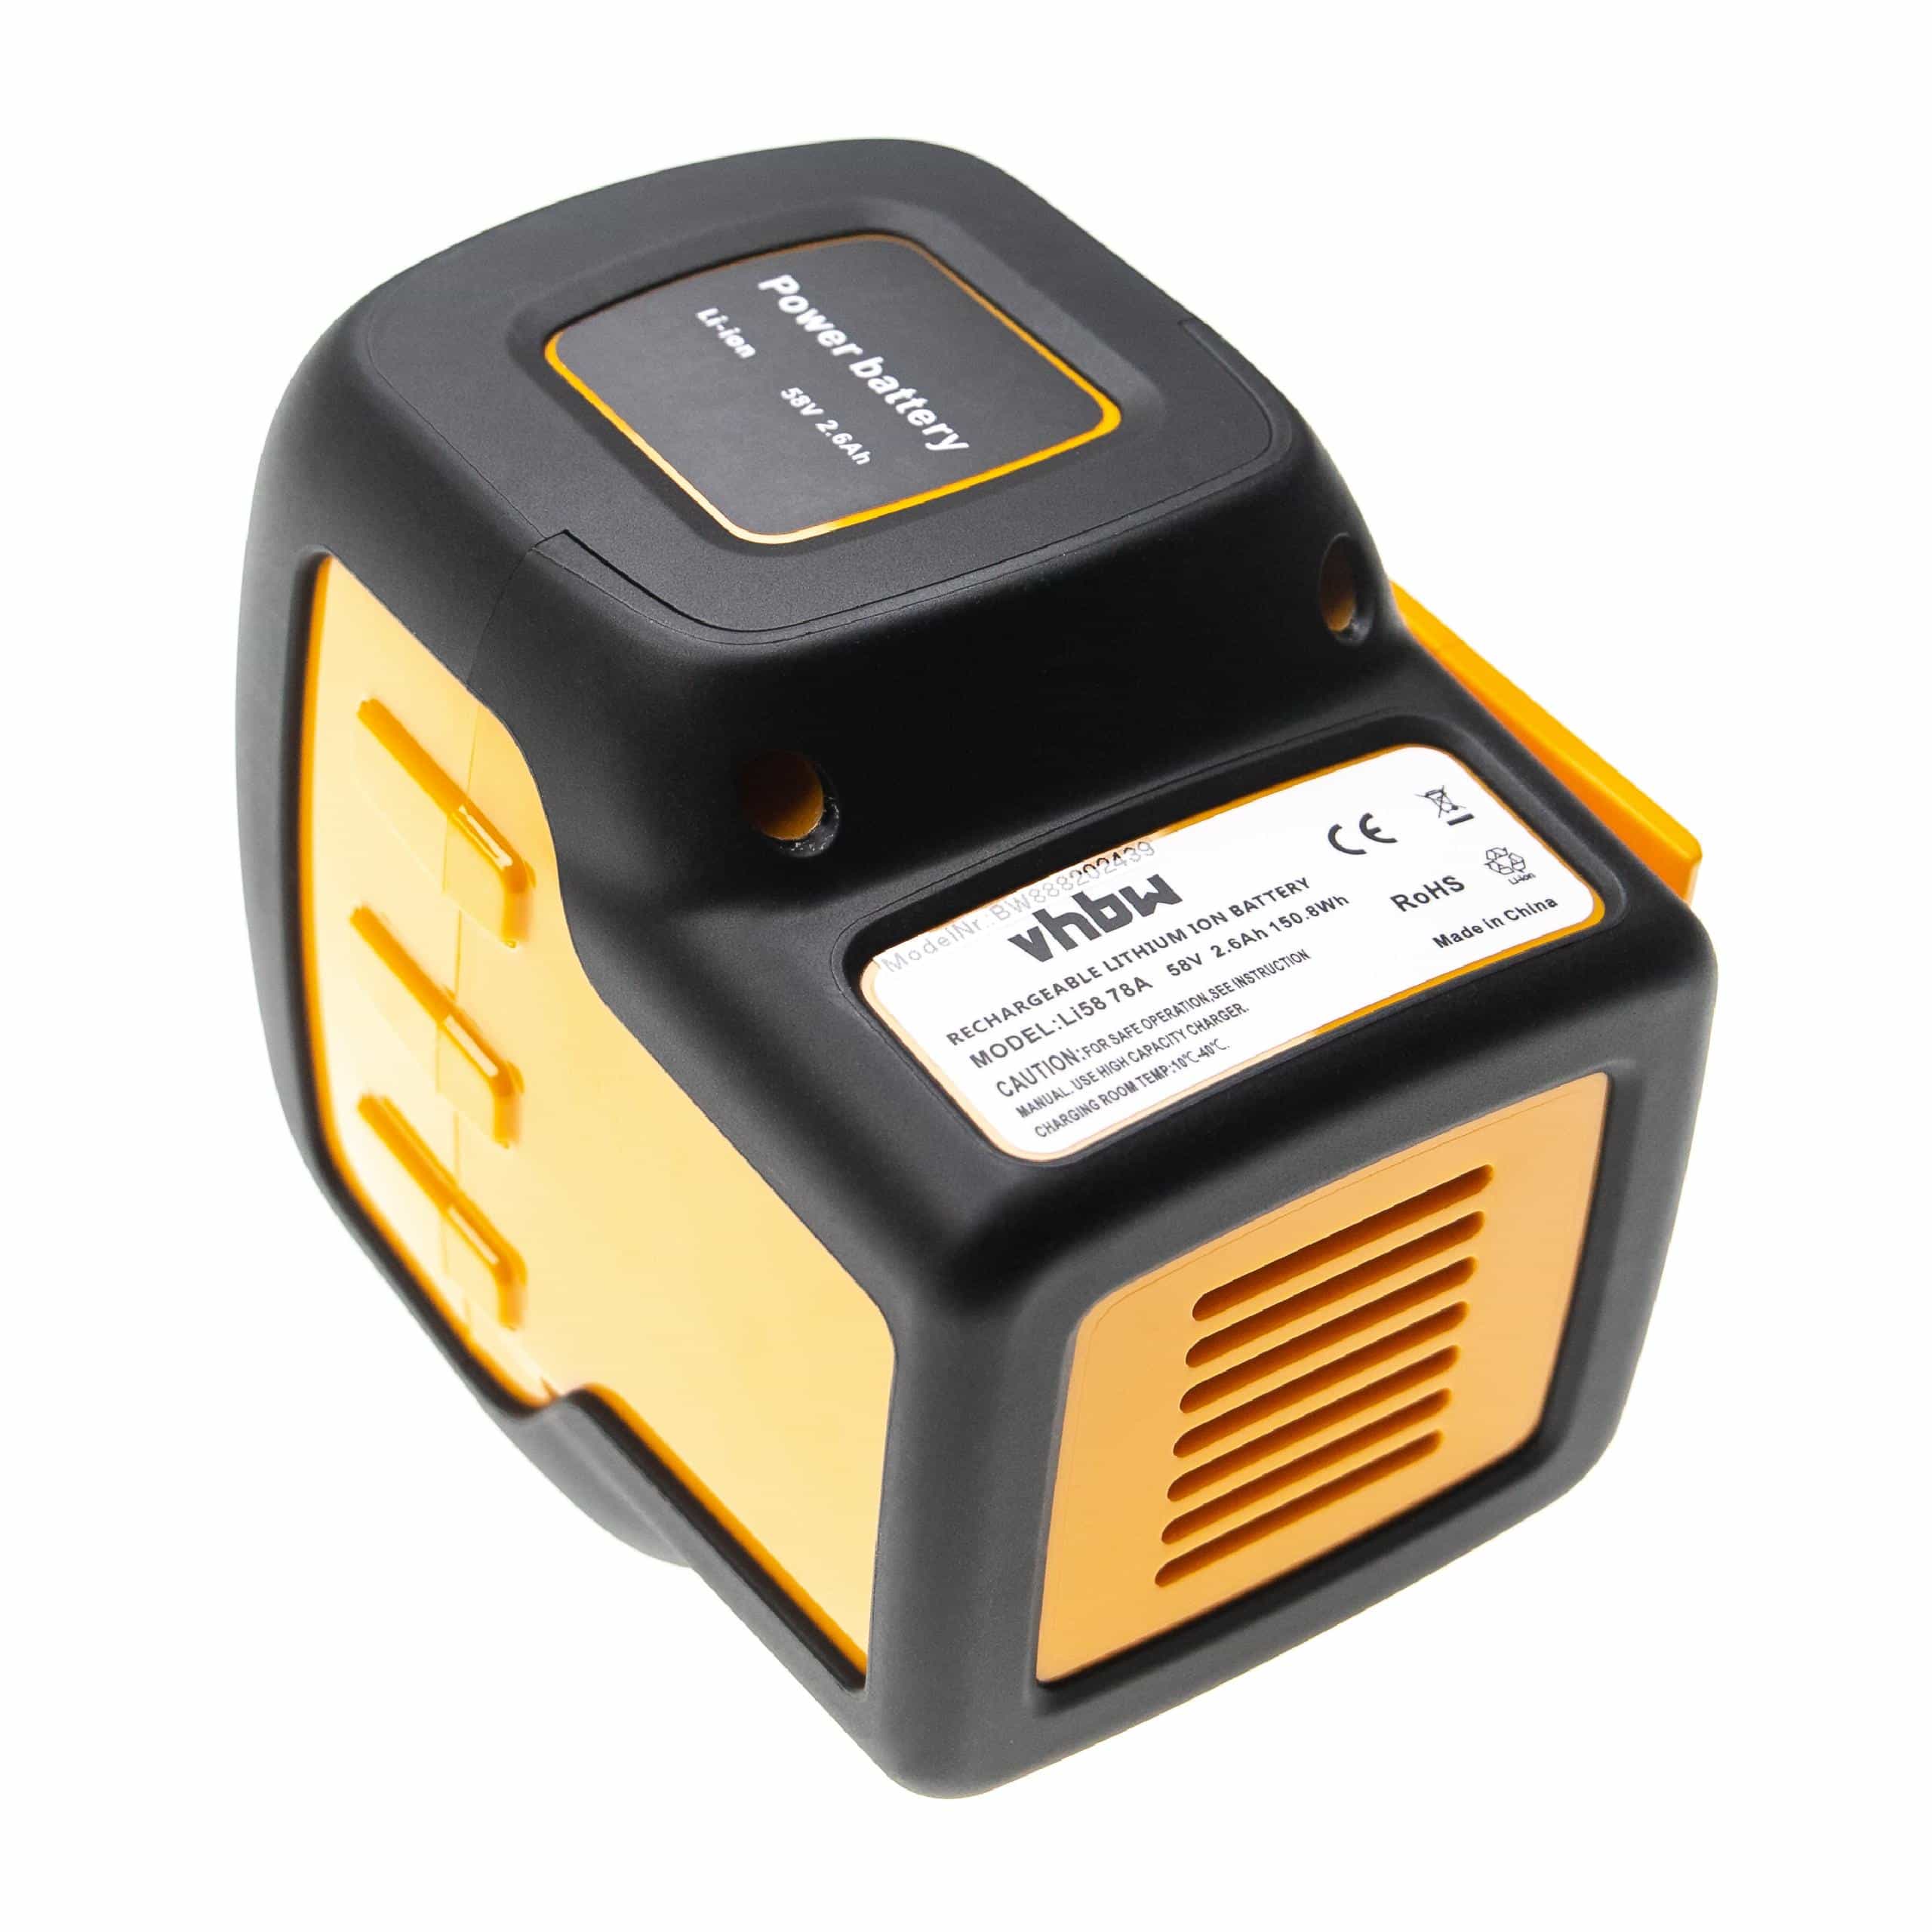 Electric Power Tool Battery Replaces McCulloch 59-09.238.03, 582611701, 590810201 - 2600 mAh, 58 V, Li-Ion